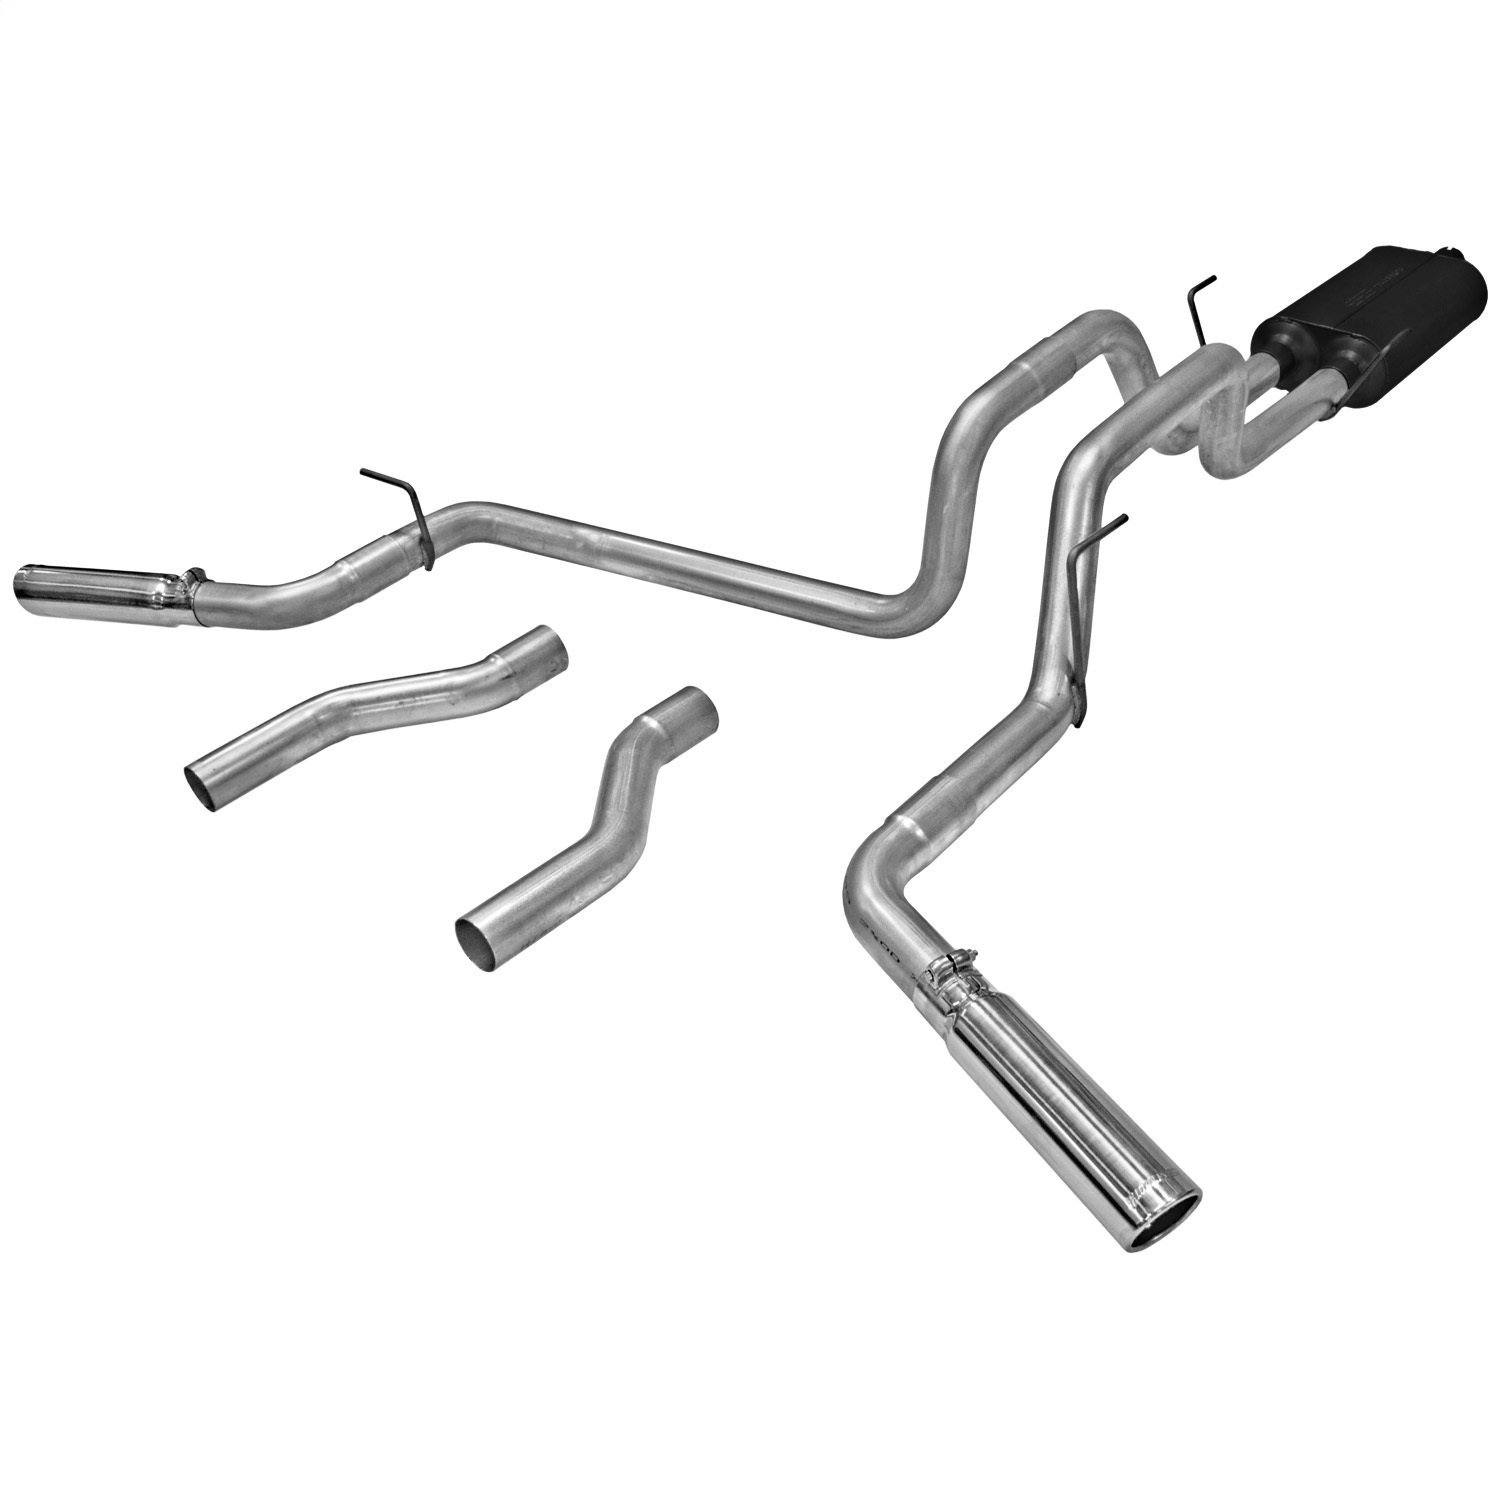 Flowmaster Flowmaster 17476 American Thunder Cat Back Exhaust System Fits 02-05 Ram 1500